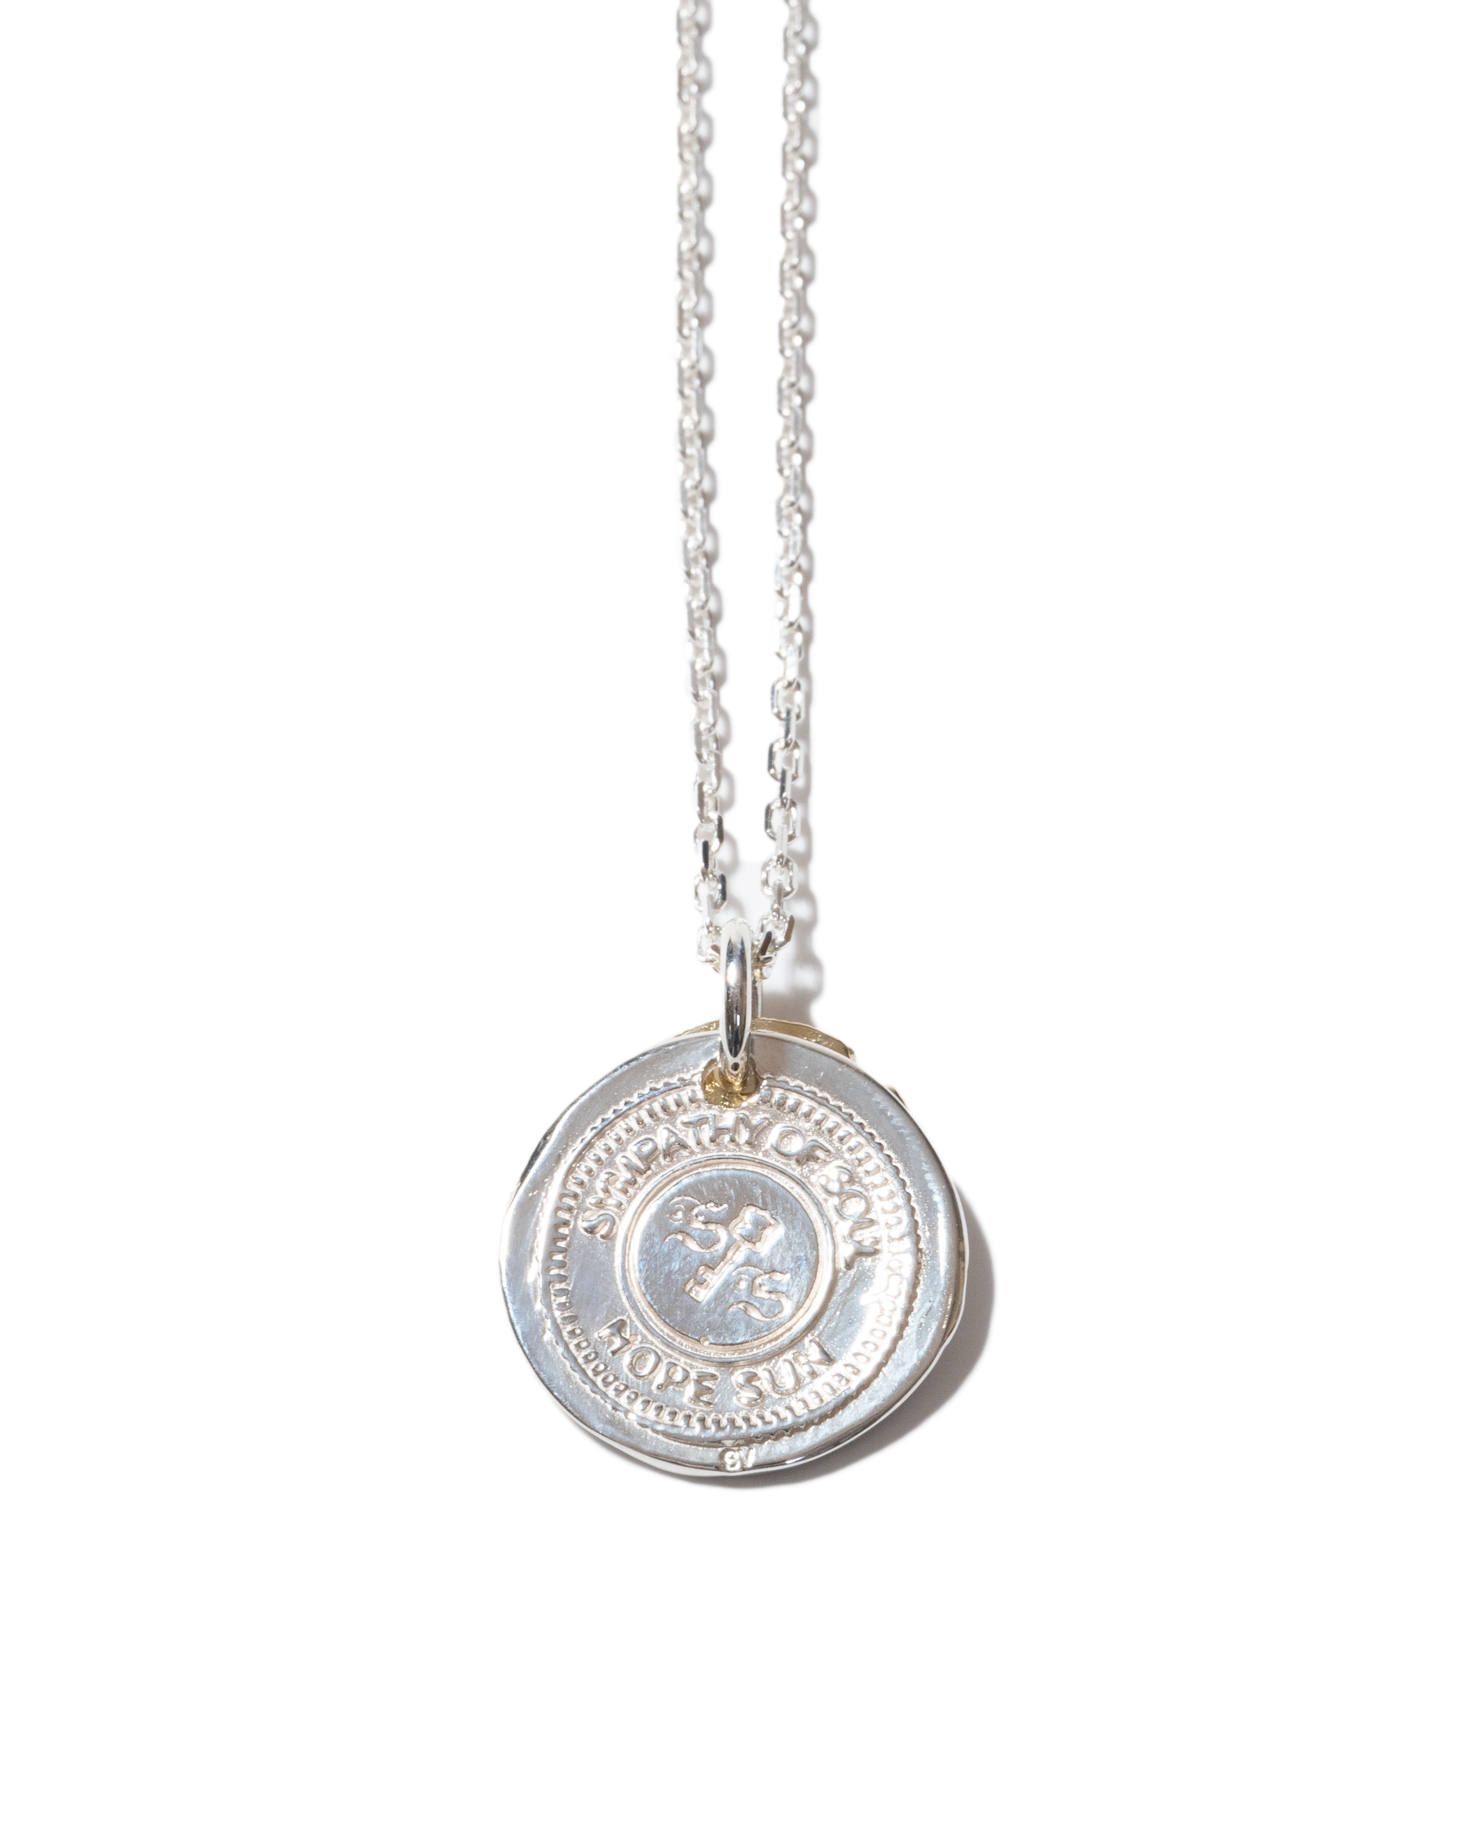 Sympathy of Soul - B.C. Coin Necklace / Good Luck - Silver 